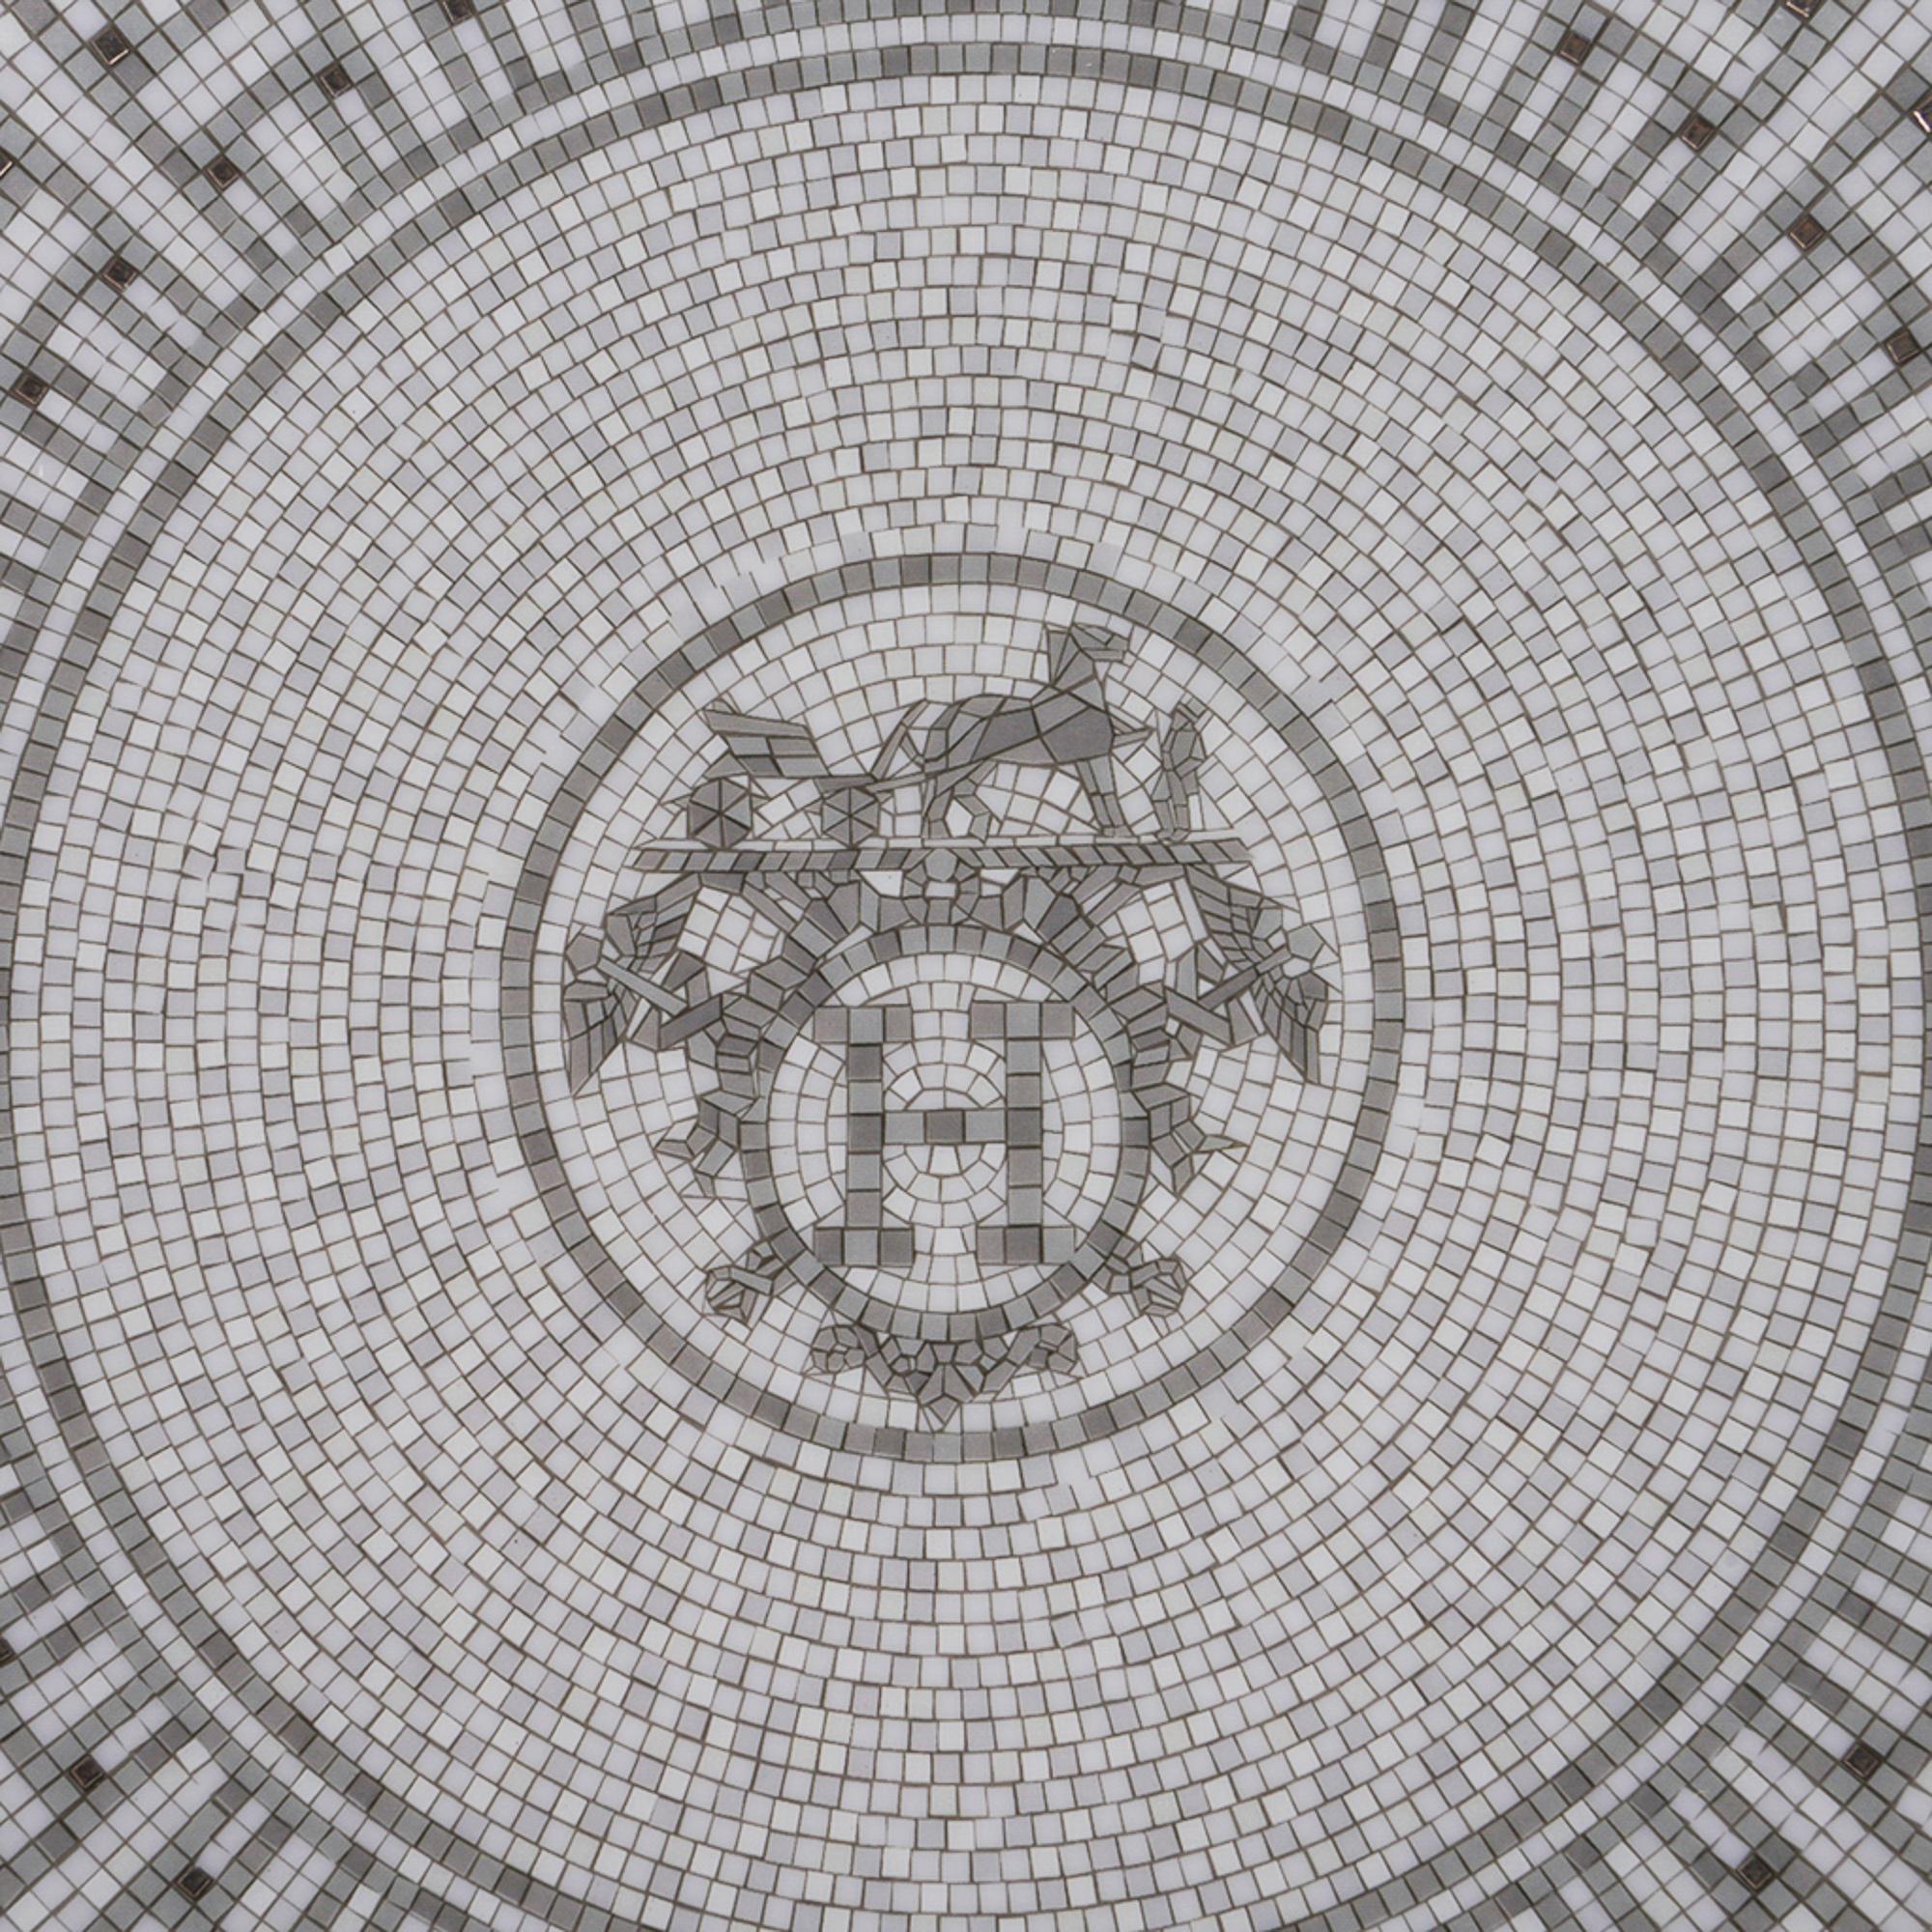 Mightychic offers an Hermes Mosaique Au 24 Platinum Dessert Plate Set of 2 in porcelain.
The mosaic motif reflects the mosaic floor at the entrance of the 24 Faubourg St. Honore flagship store in Paris.
For an elegant table.
Wonderful for home or